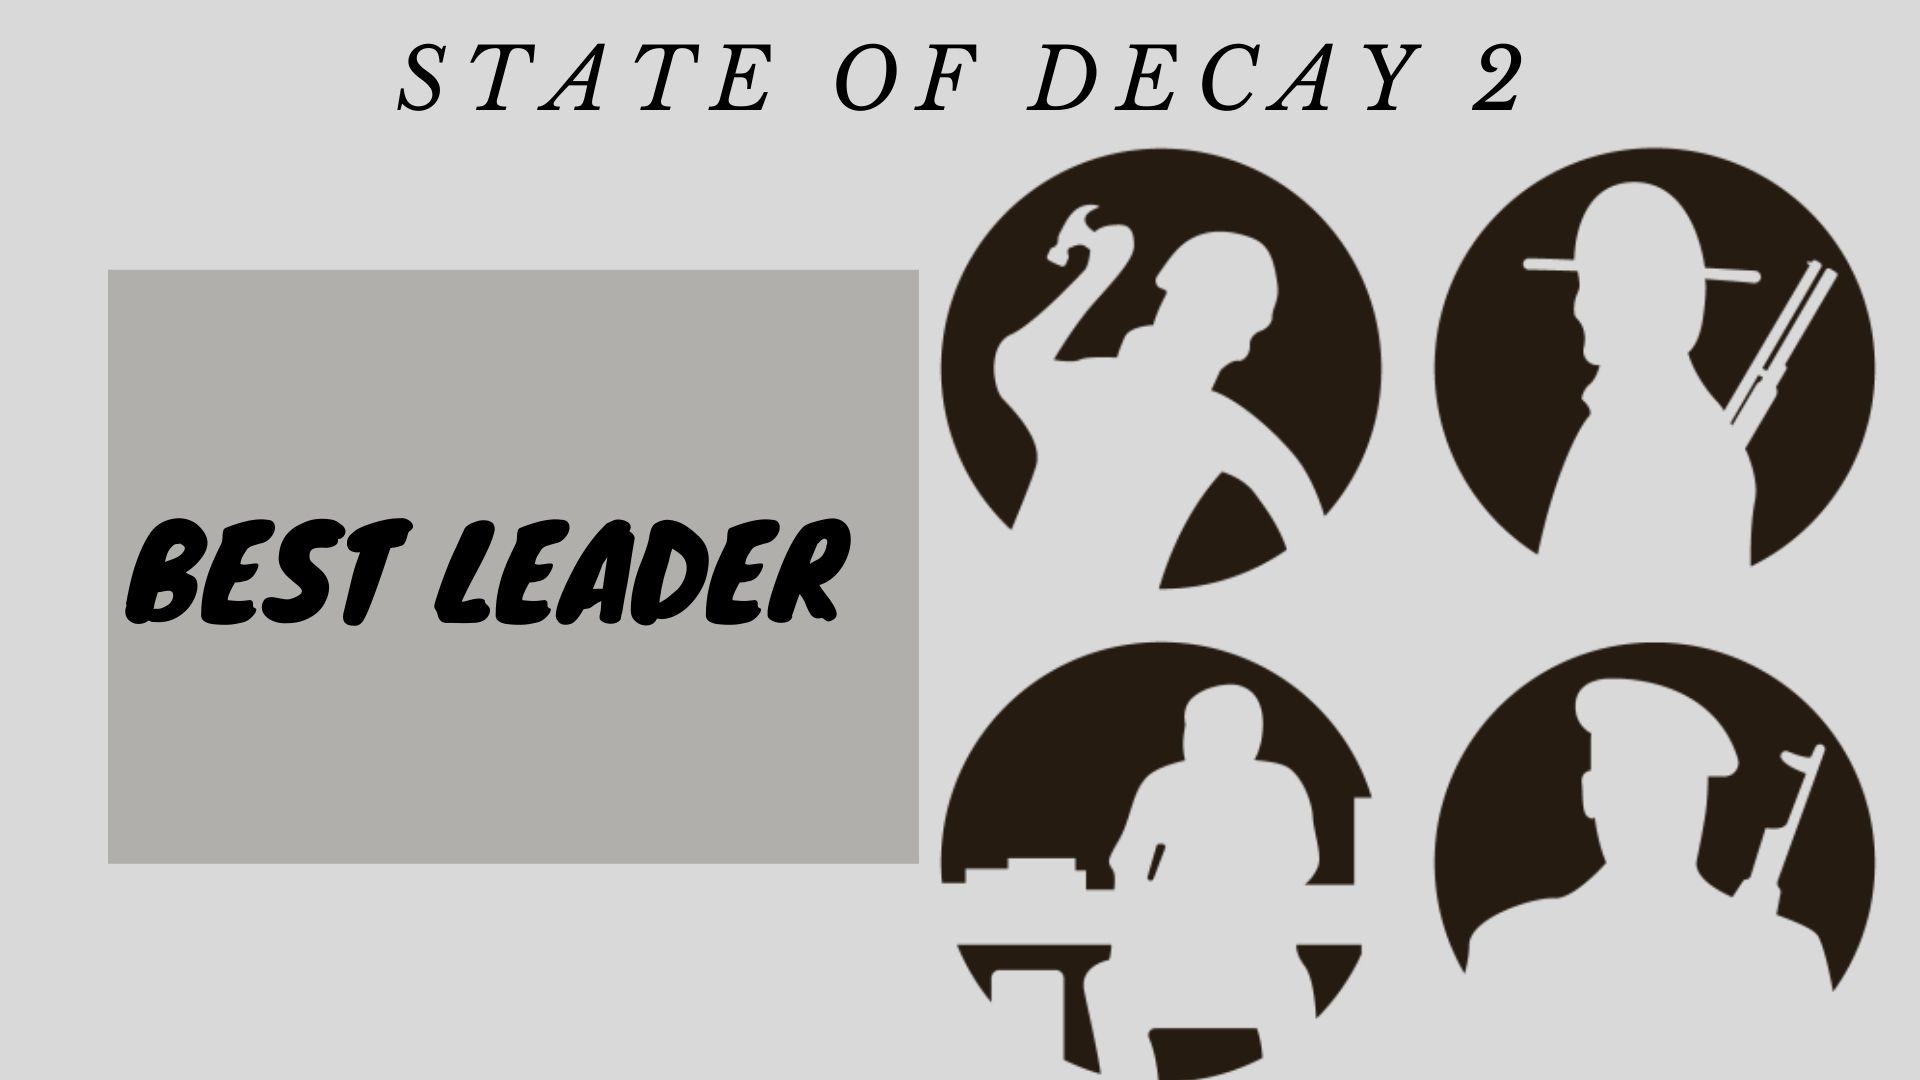 State of Decay 2 Best Leader Full Guide